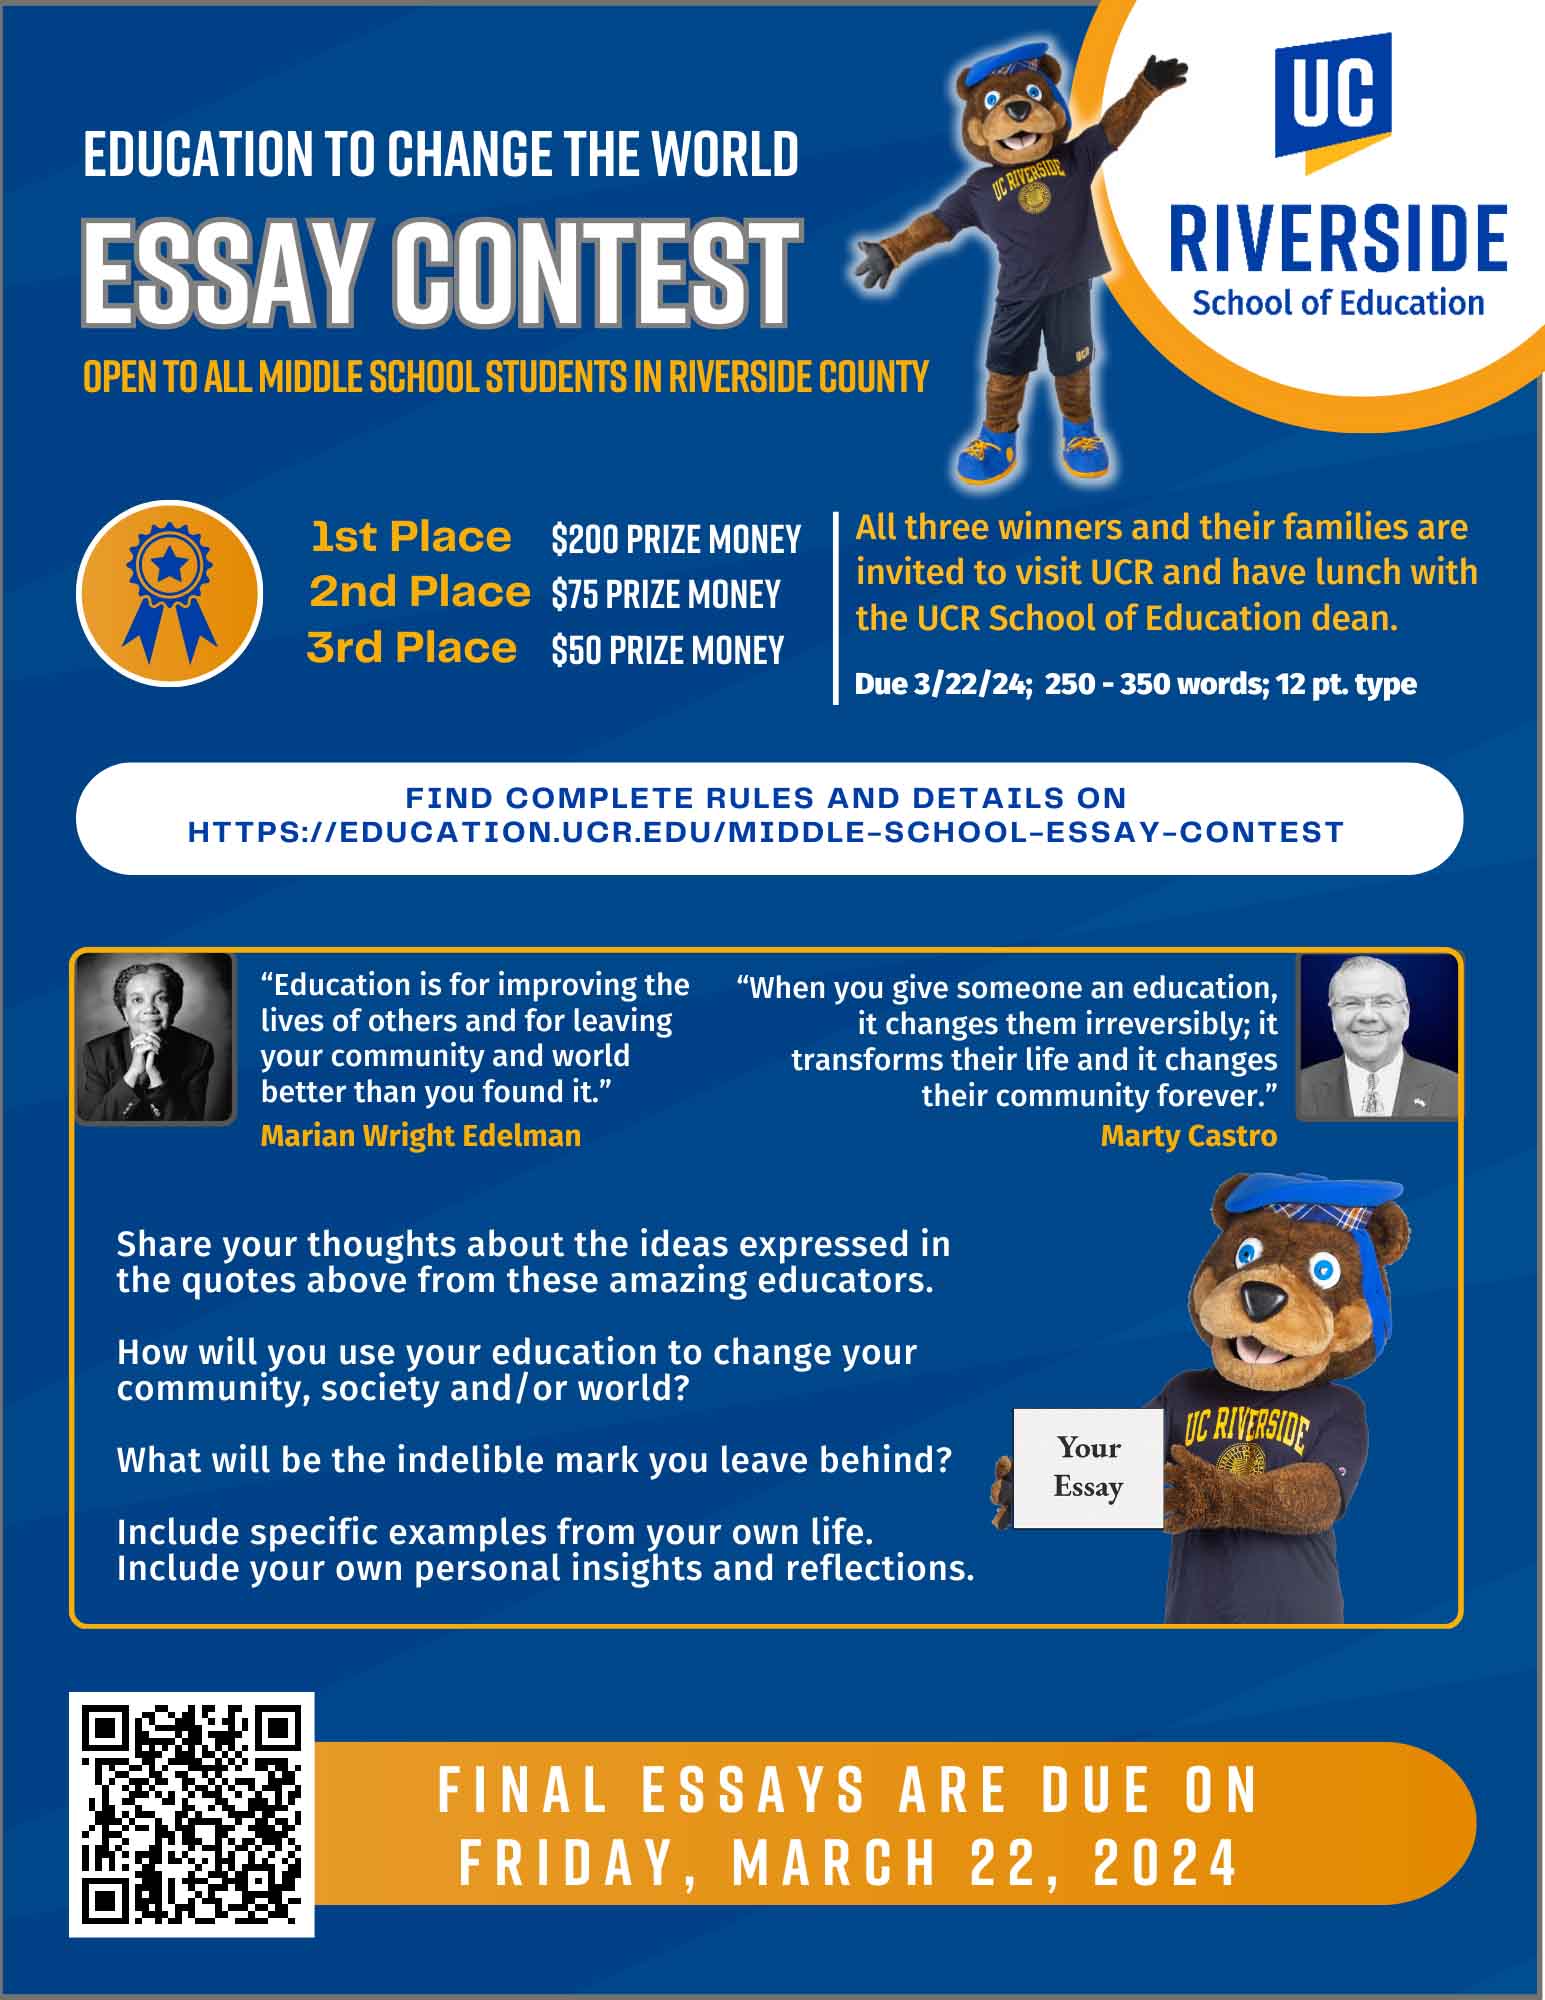 Education to Change the World - Essay Contest Flyer